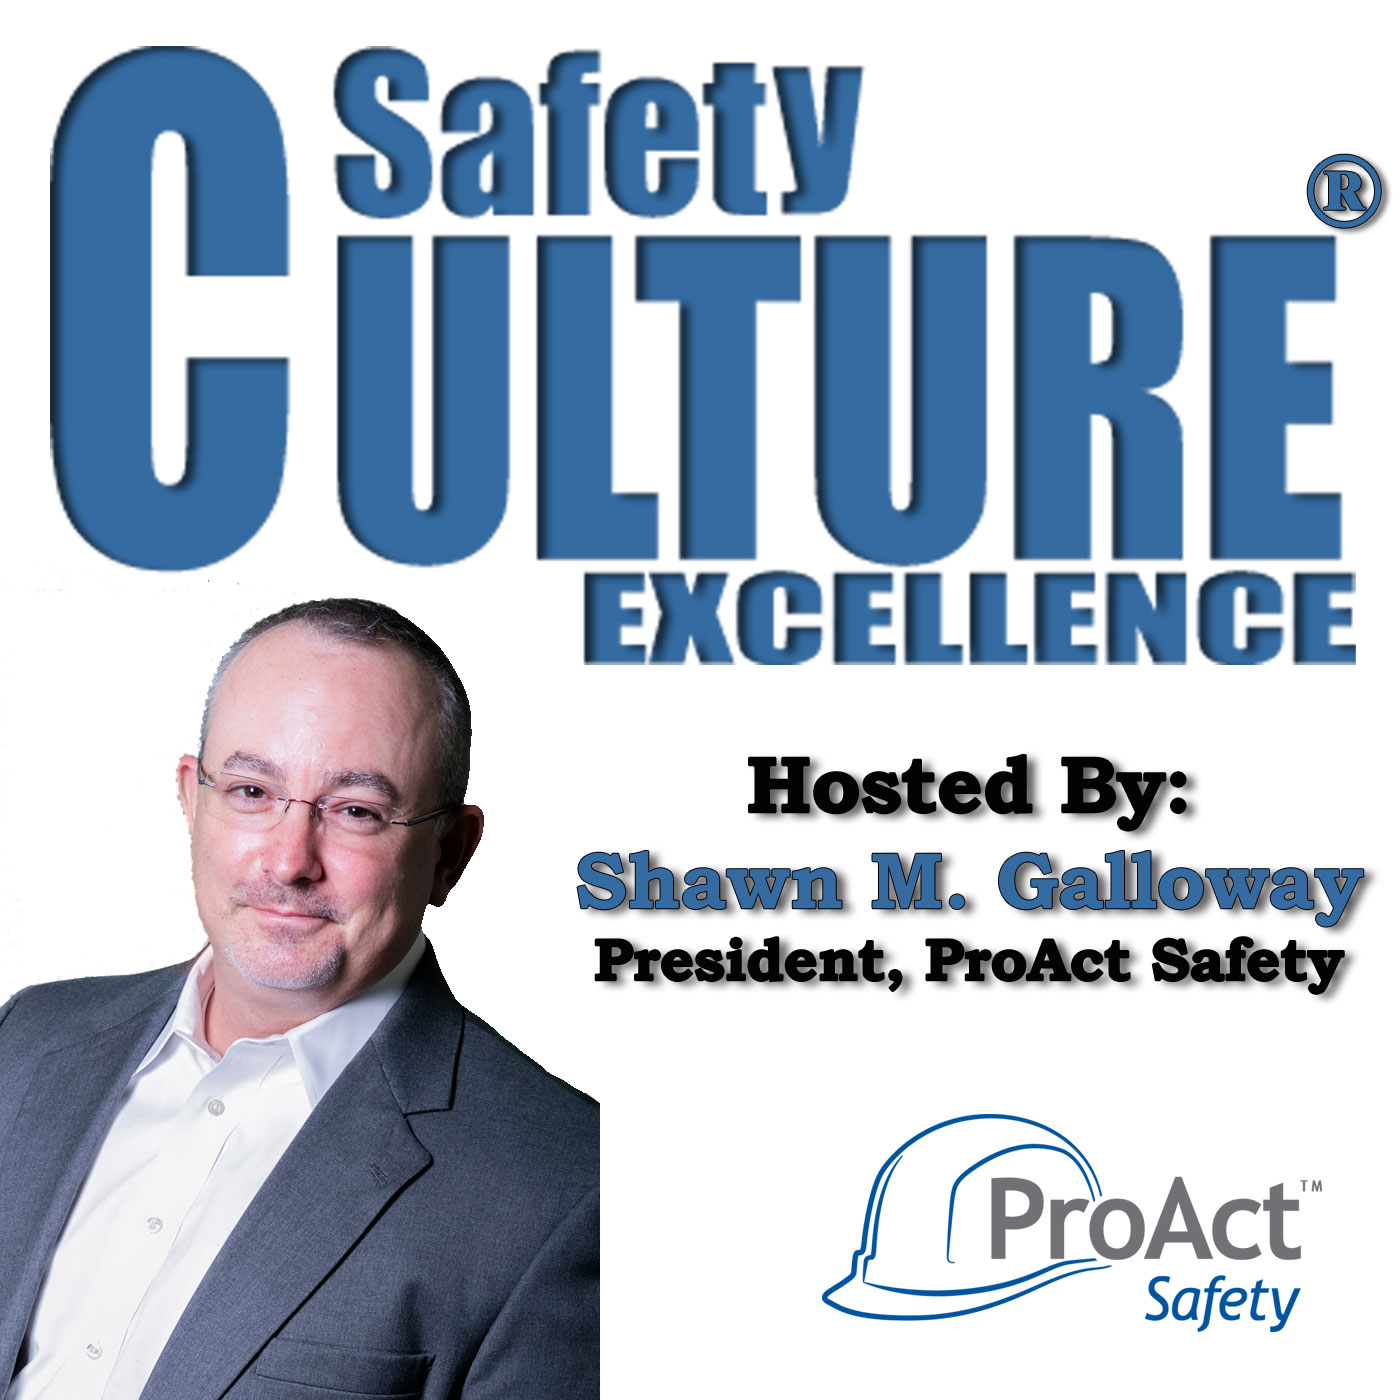 536: The Future of Safety Excellence